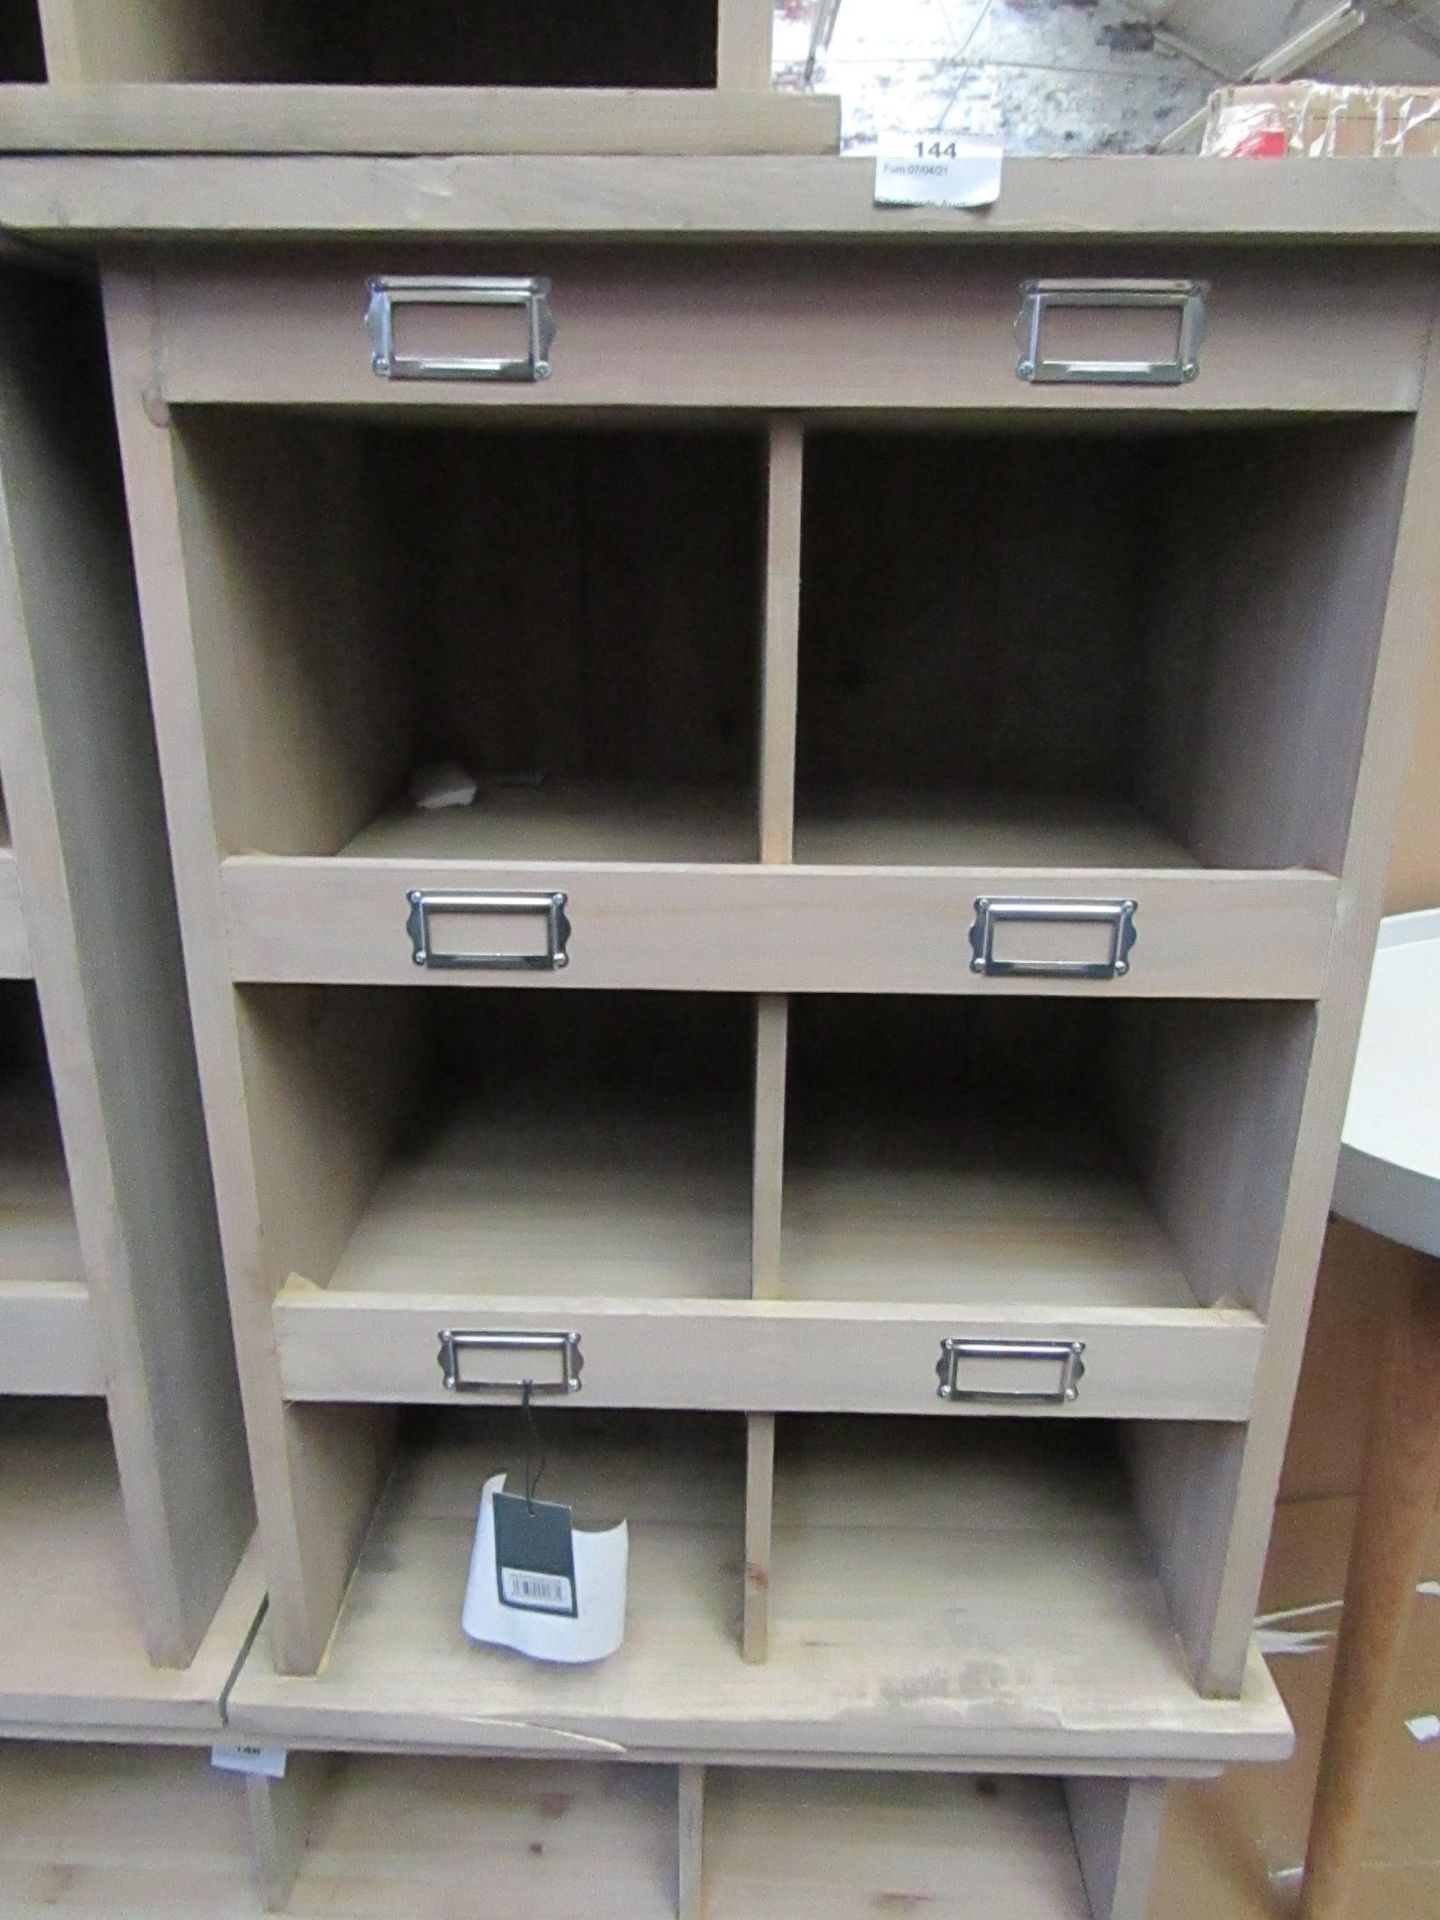 | 1x | COX & COX CHEDWORTH 6 SHOE LOCKER SPRUCE | SOME DENTS AT THE FRONT & NO BOXED | RRP £120 |